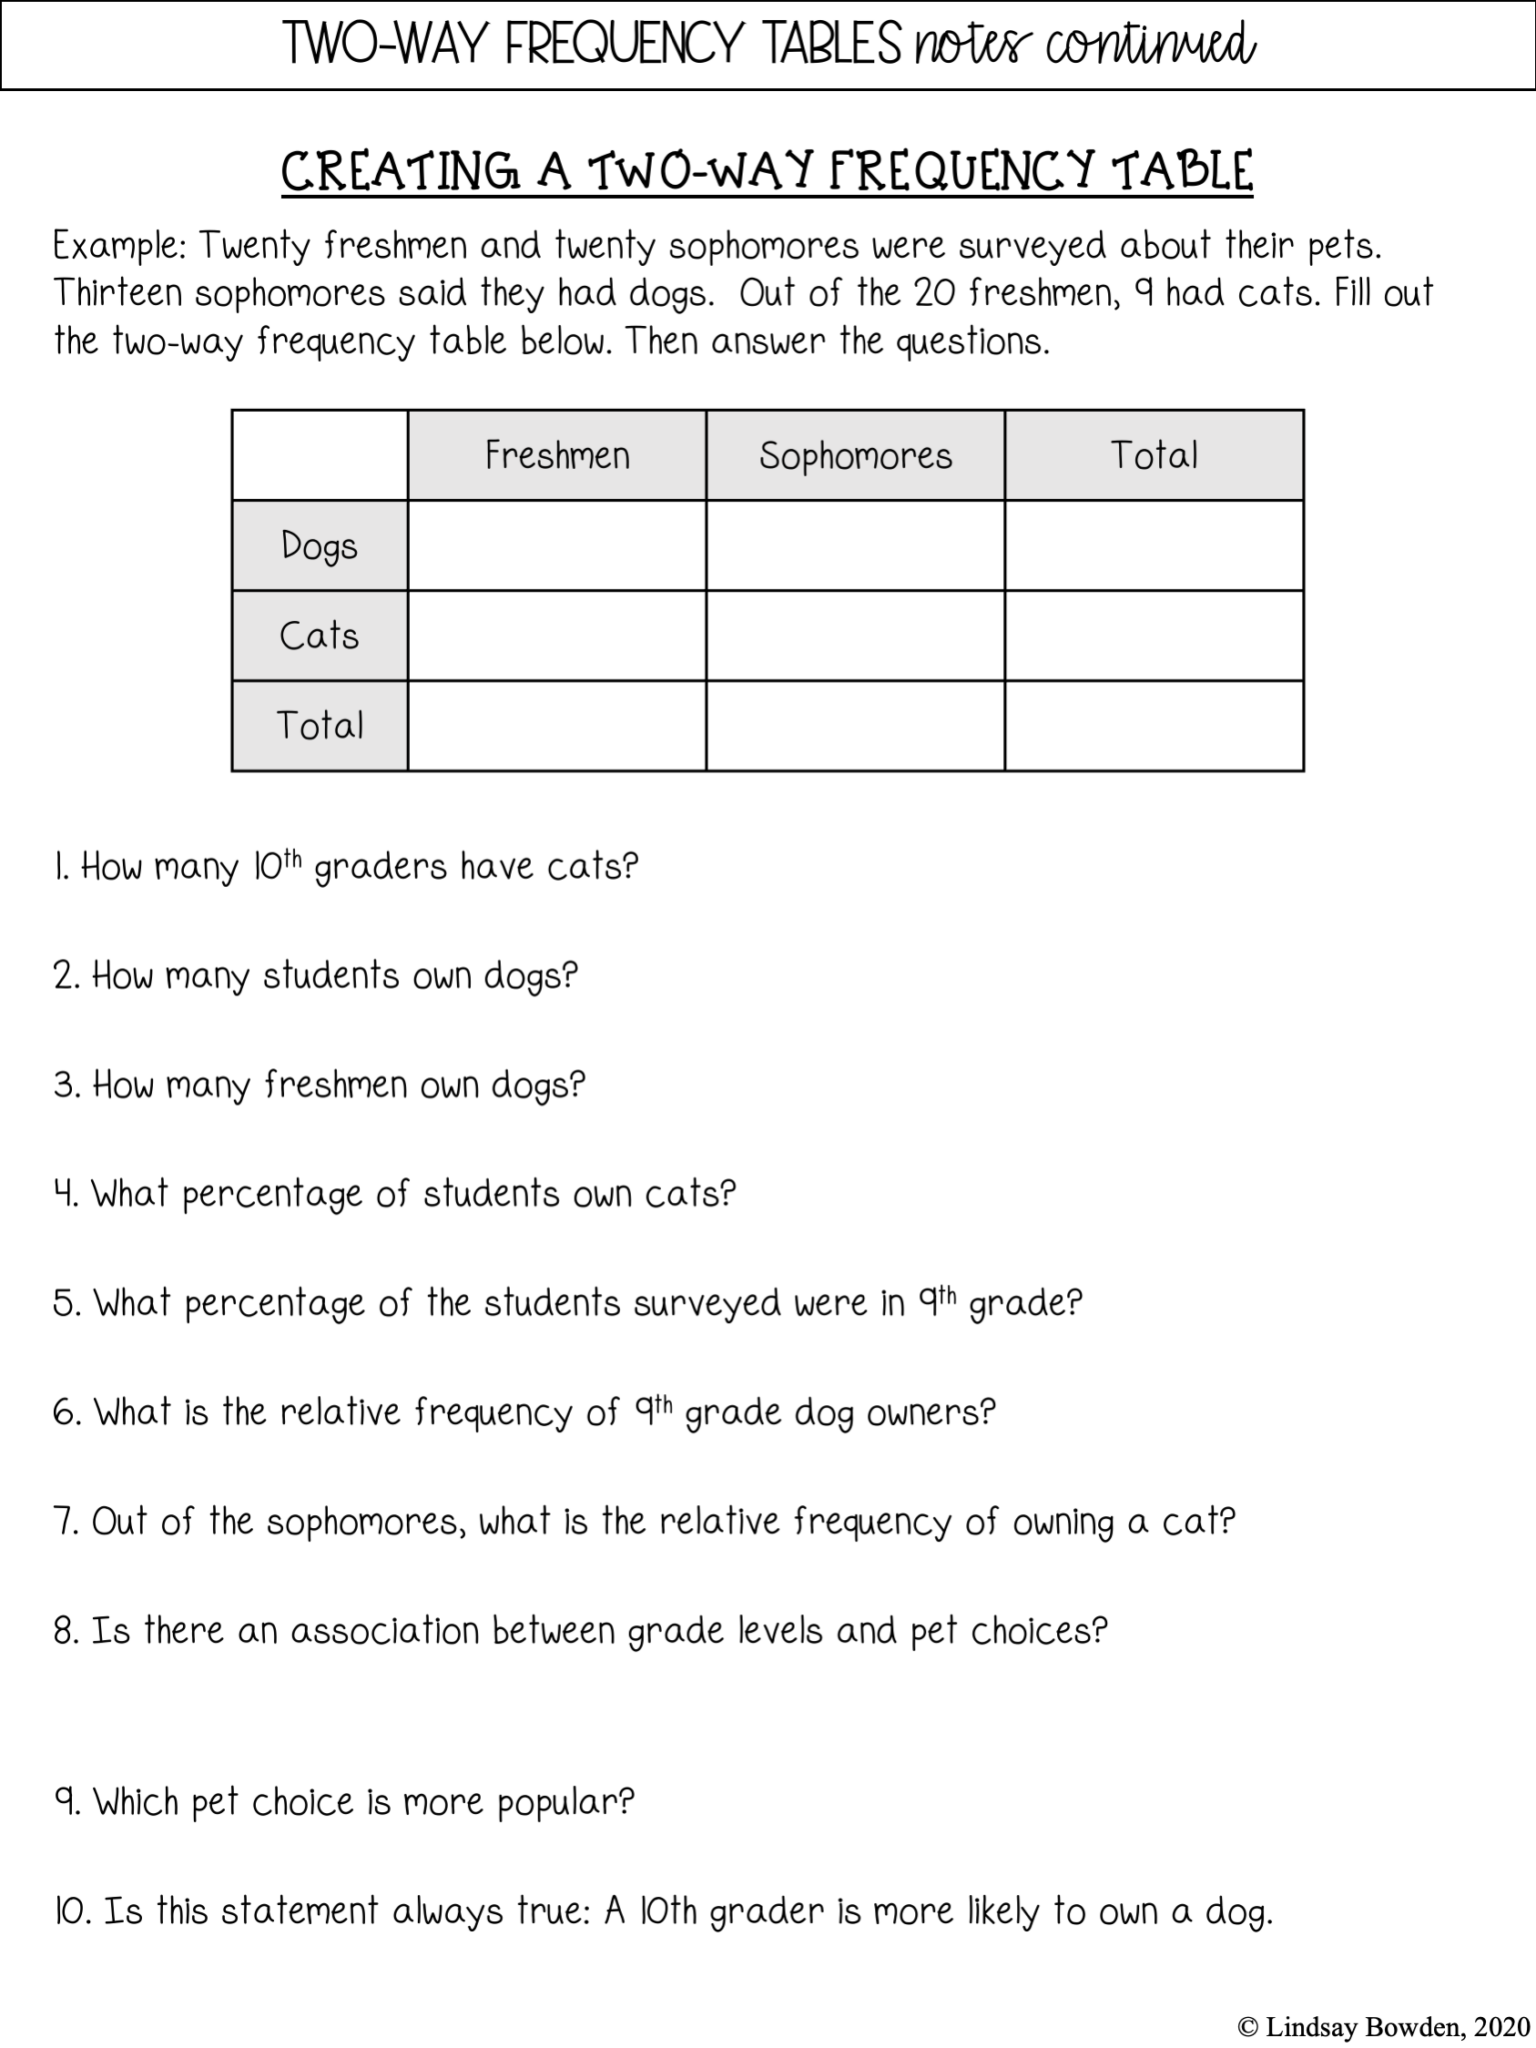 two-way-frequency-tables-notes-and-worksheets-lindsay-bowden